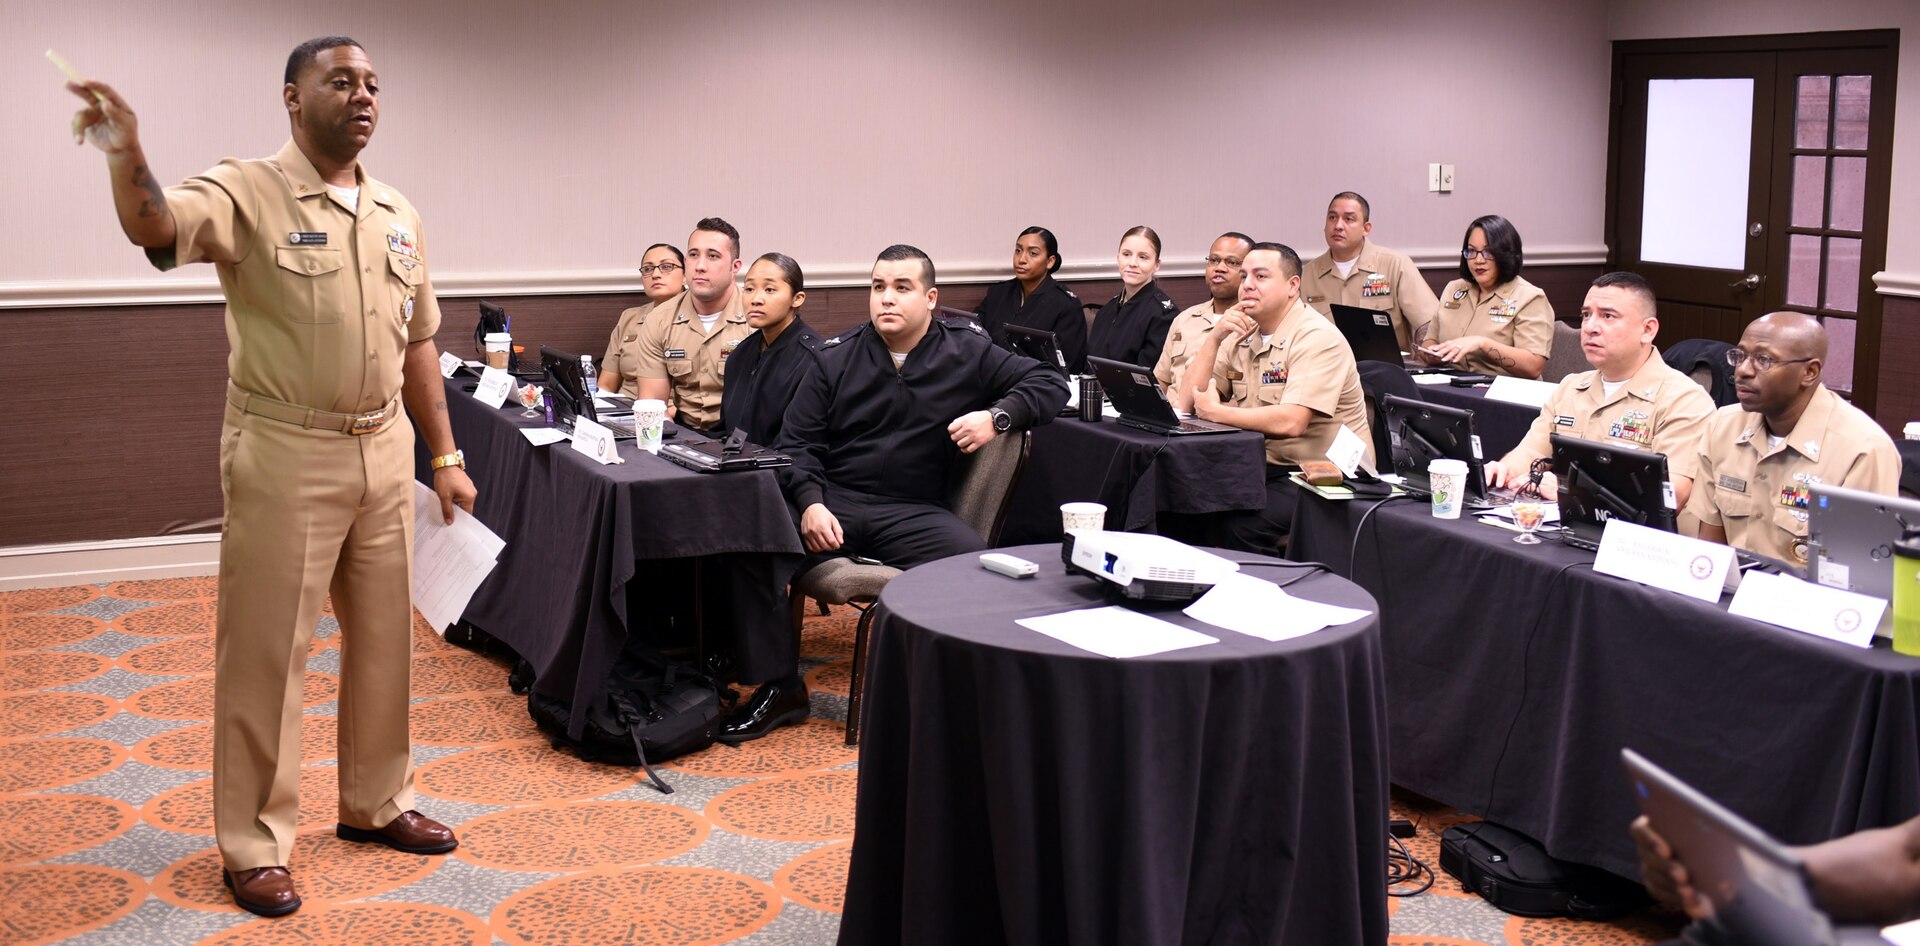 Chief Petty Officer Kevin Jones, a trainer assigned to Navy Recruiting District San Antonio, provides market development training to recruiters of NRD’s and Navy Talent Acquisition Groups during a Leading Petty Officers Course held at the Double Tree Hotel.